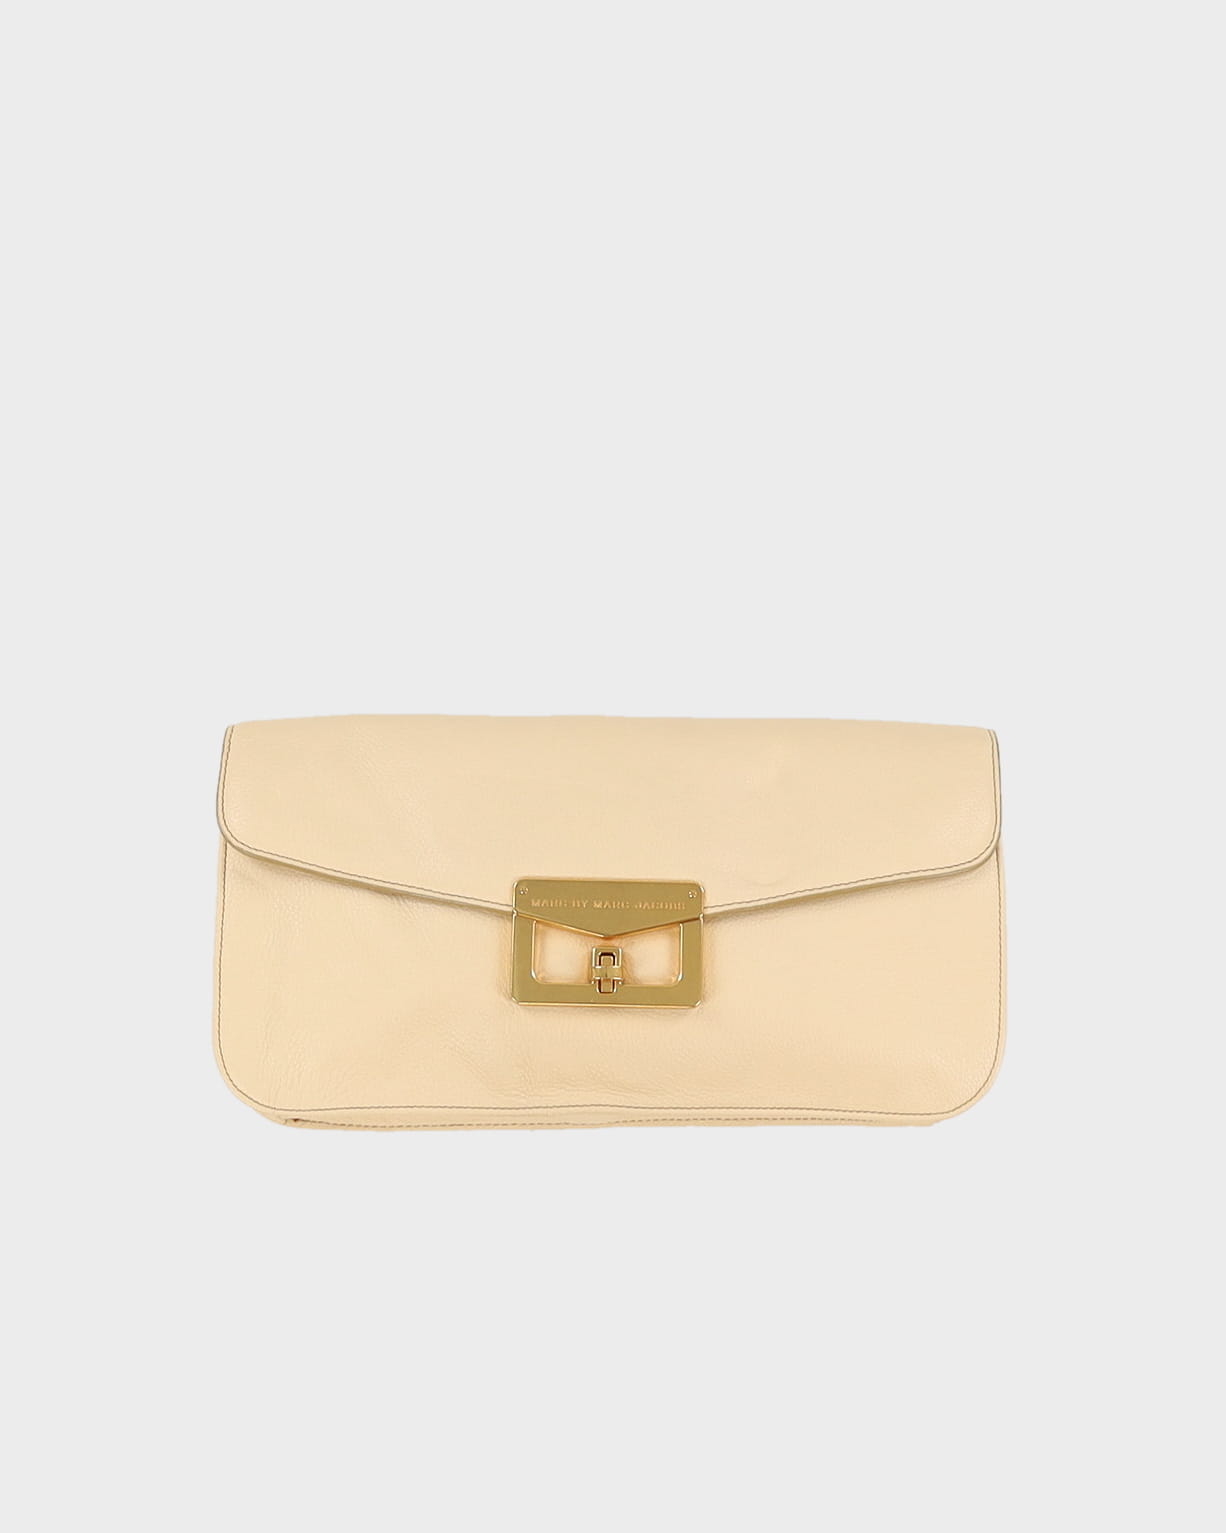 Marc Jacobs Cream Clutch Bag - One Size